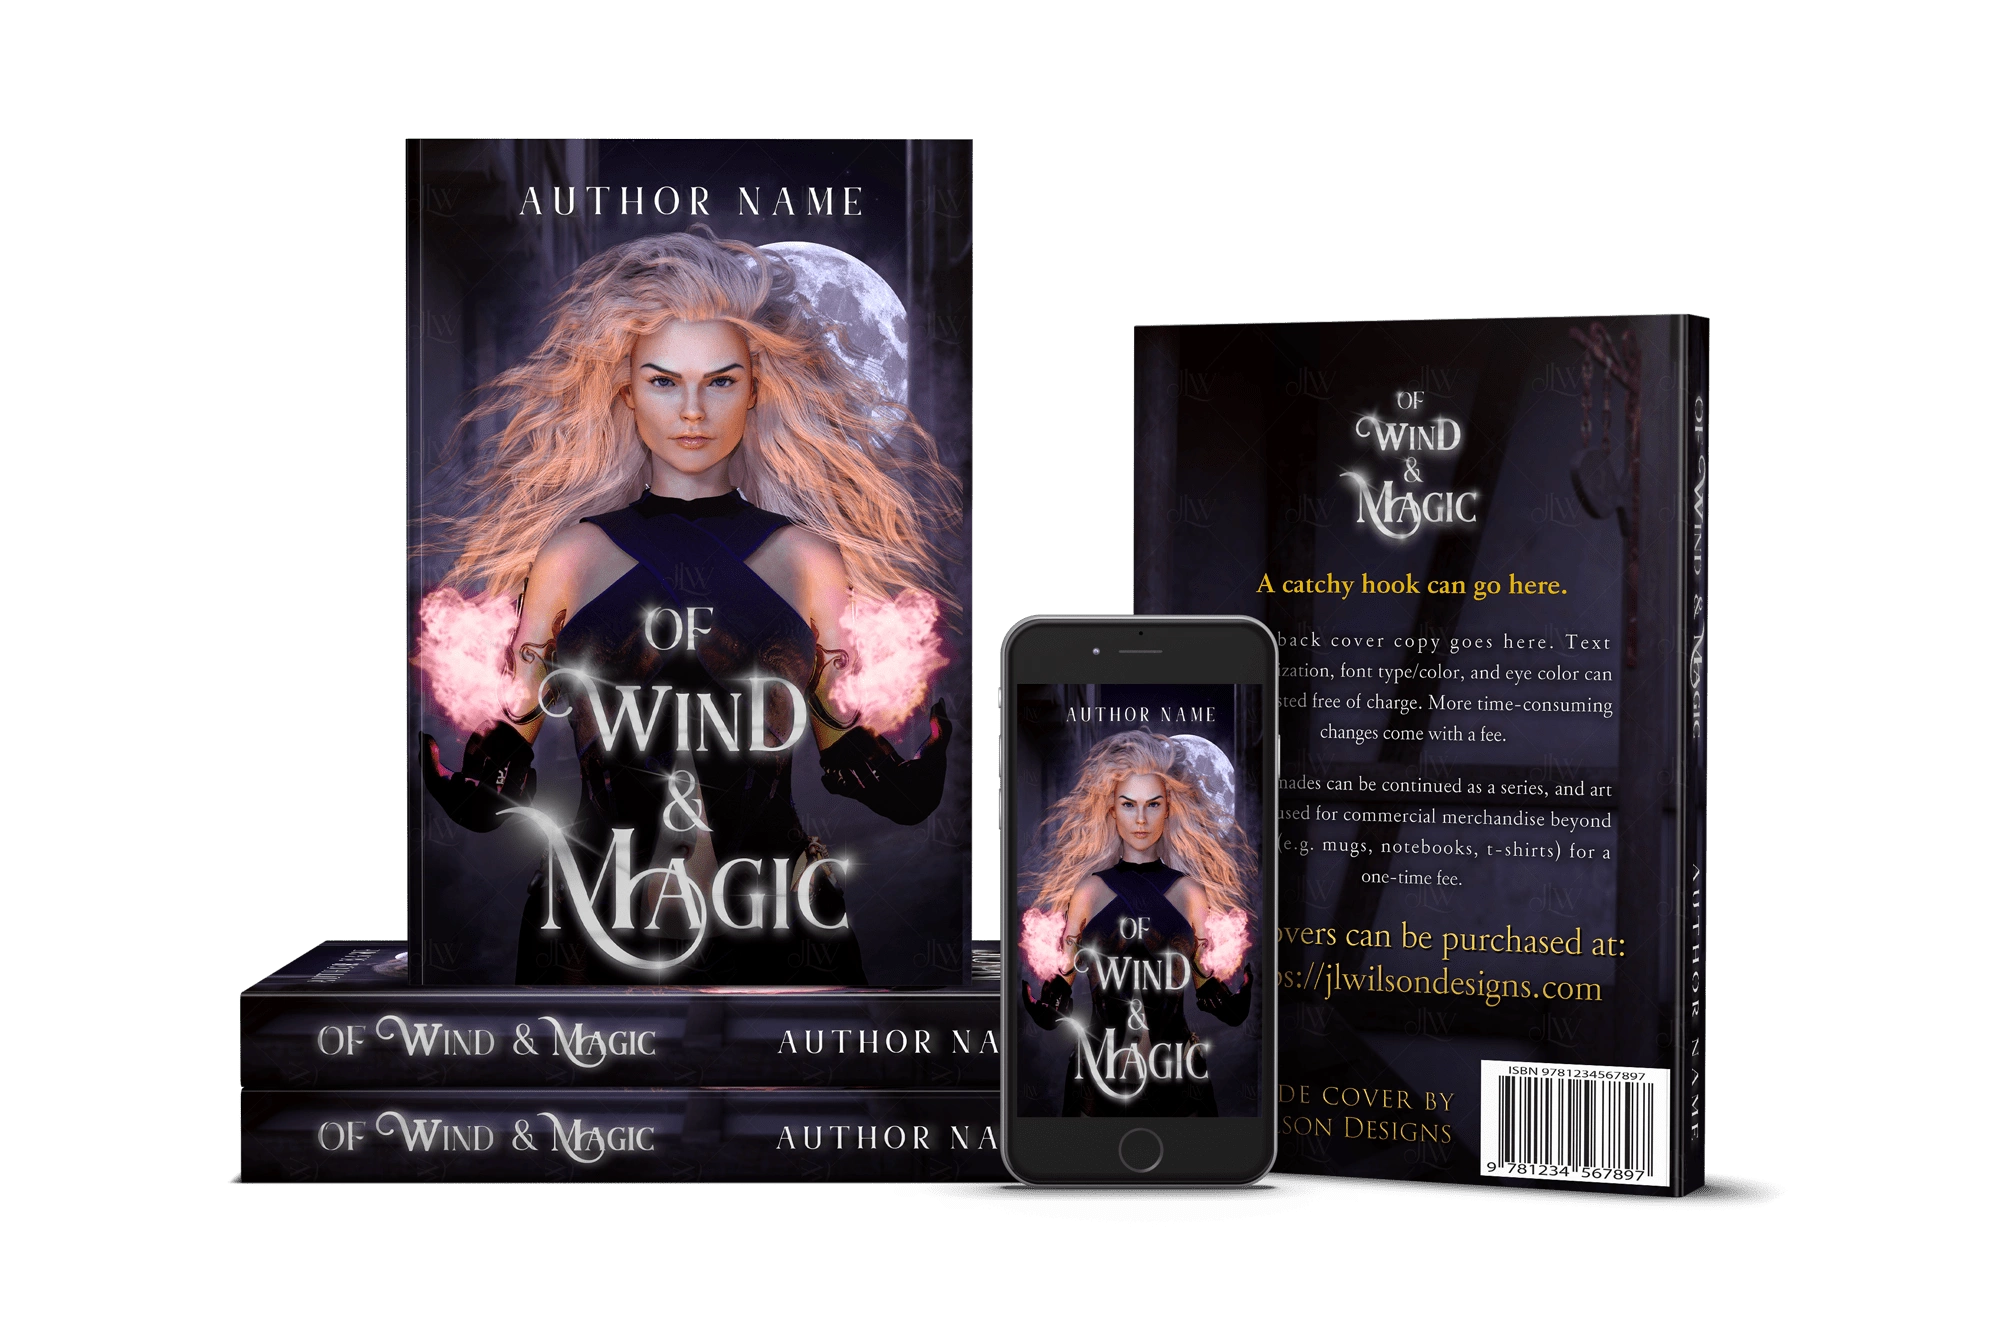 A fantasy book cover with a beautiful woman holding magic in a village